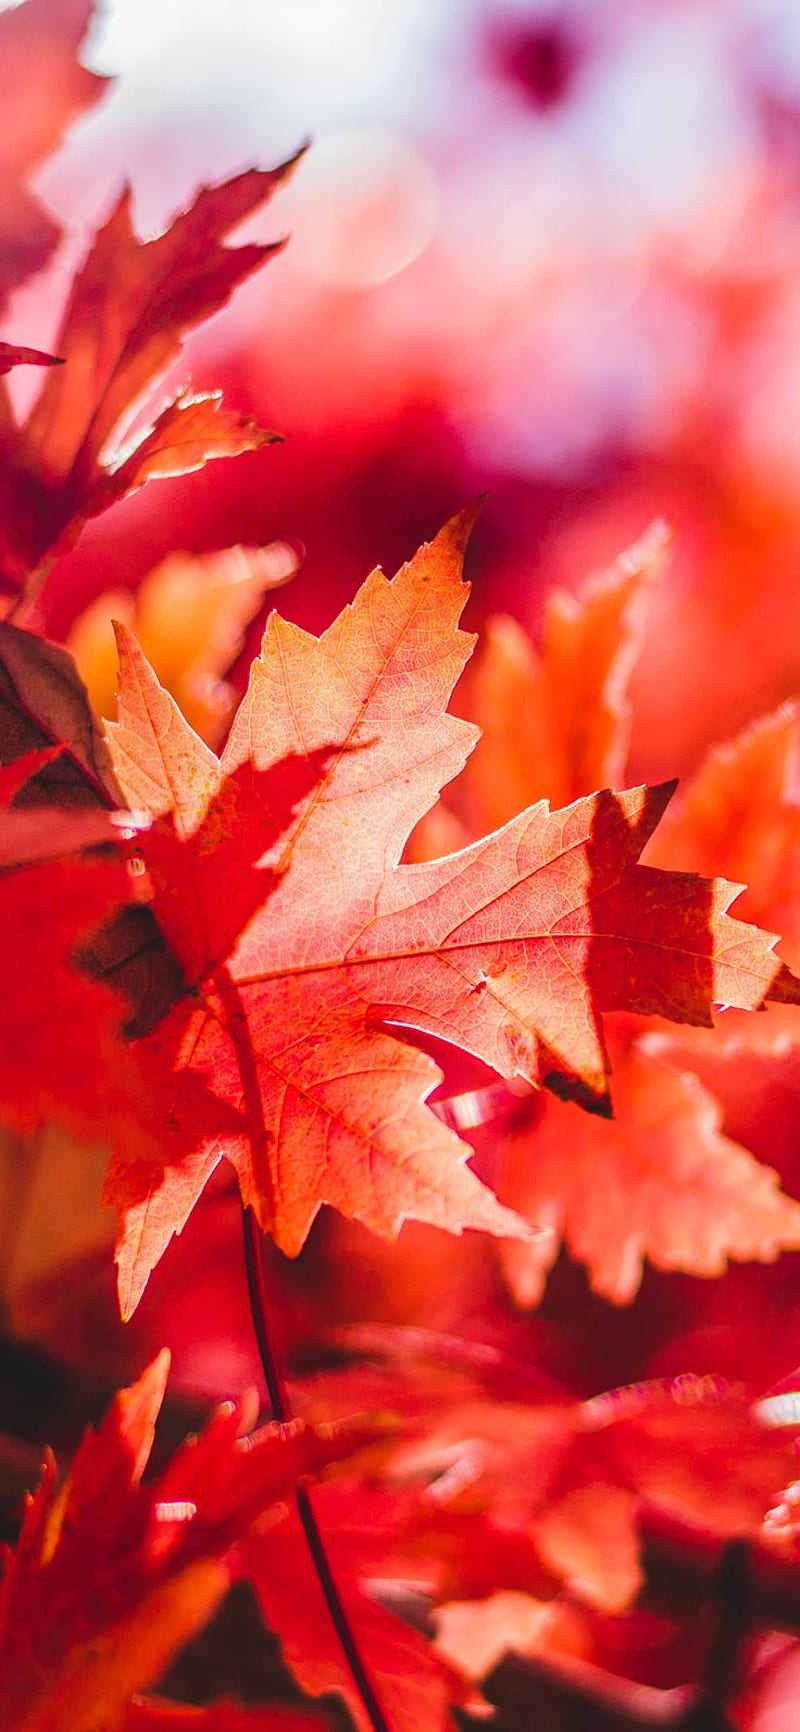 Maple Leaf Flower Red Fall Autumn Nature Via For IPhone X. Autumn Nature, Fall , Autumn graphy, Red Autumn Leaves, HD phone wallpaper